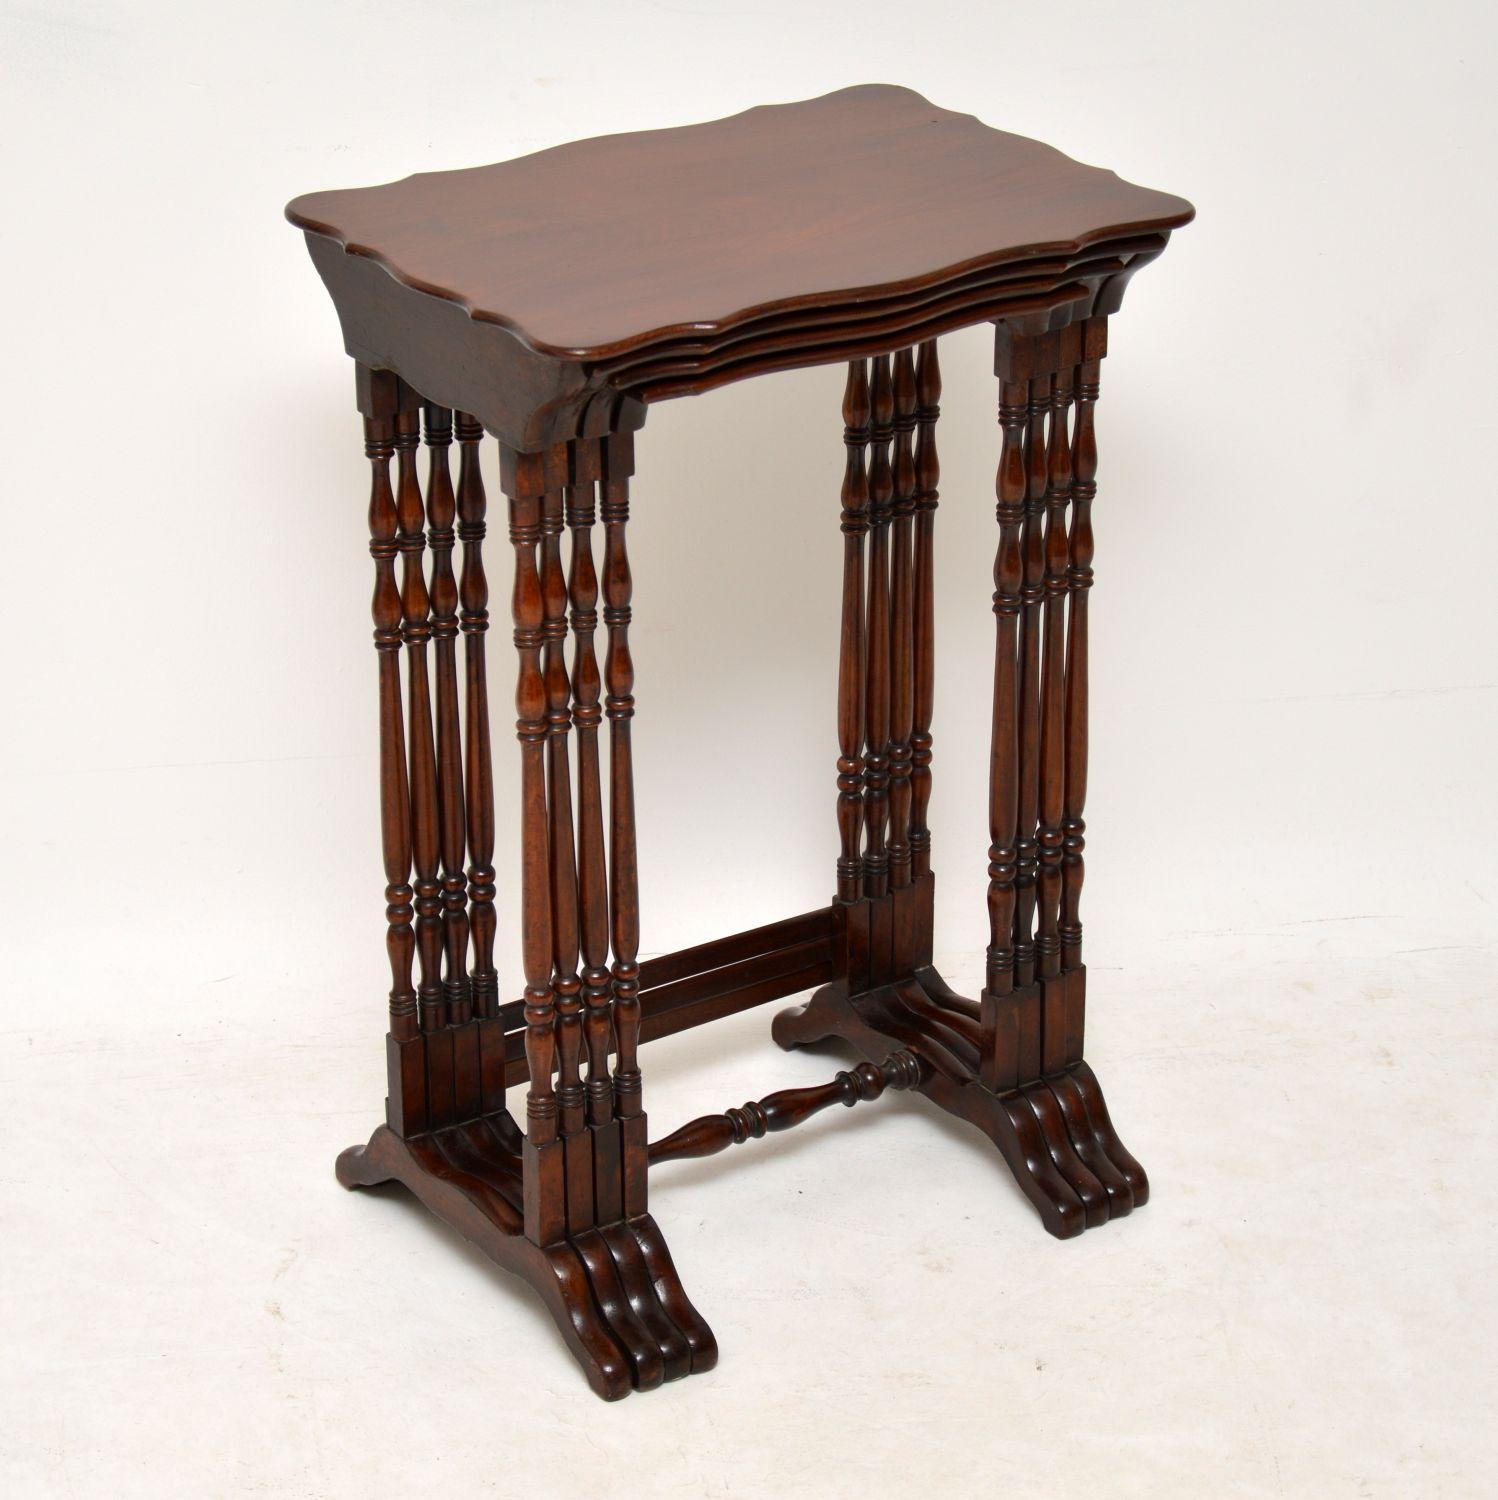 Antique solid mahogany nest of four tables in excellent condition, dating from the 19th century. The tops are shaped all the way around and the tall legs are beautifully turned. There are cross stretchers at the base which help keep them more stable